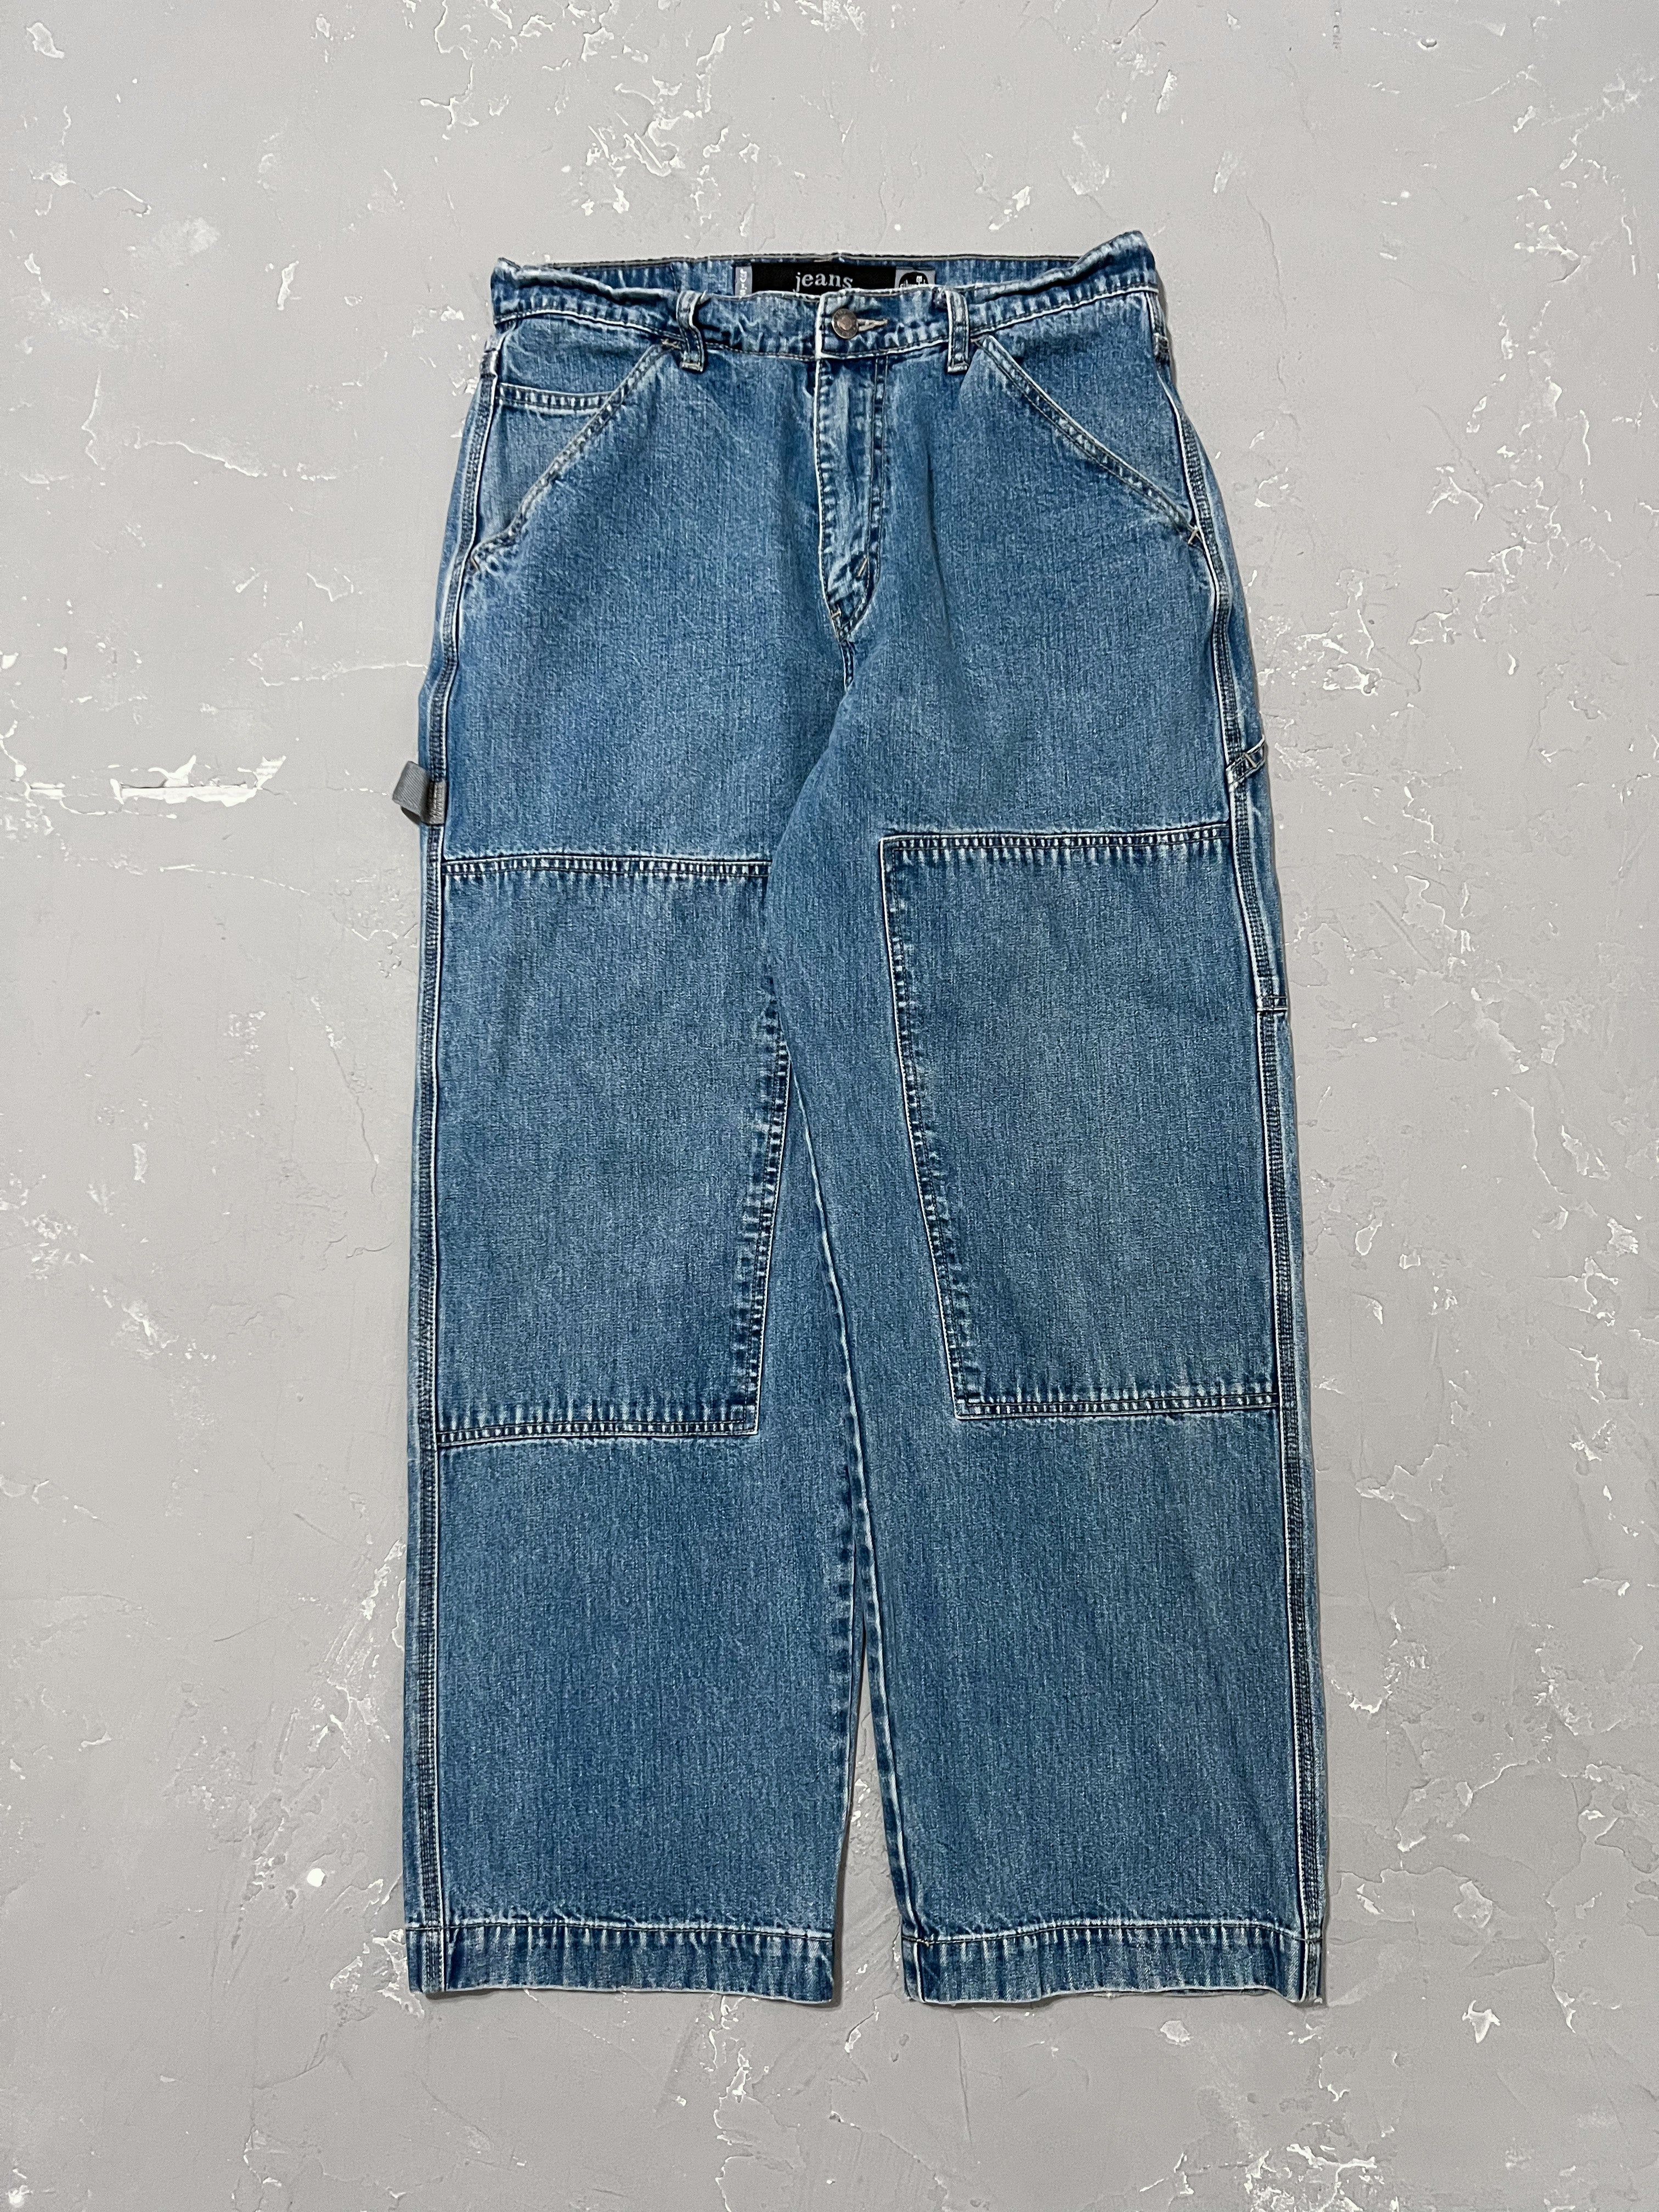 1990s Levi's Double Knee SilverTab Carpenter Pants [31 x 30] – From The Past